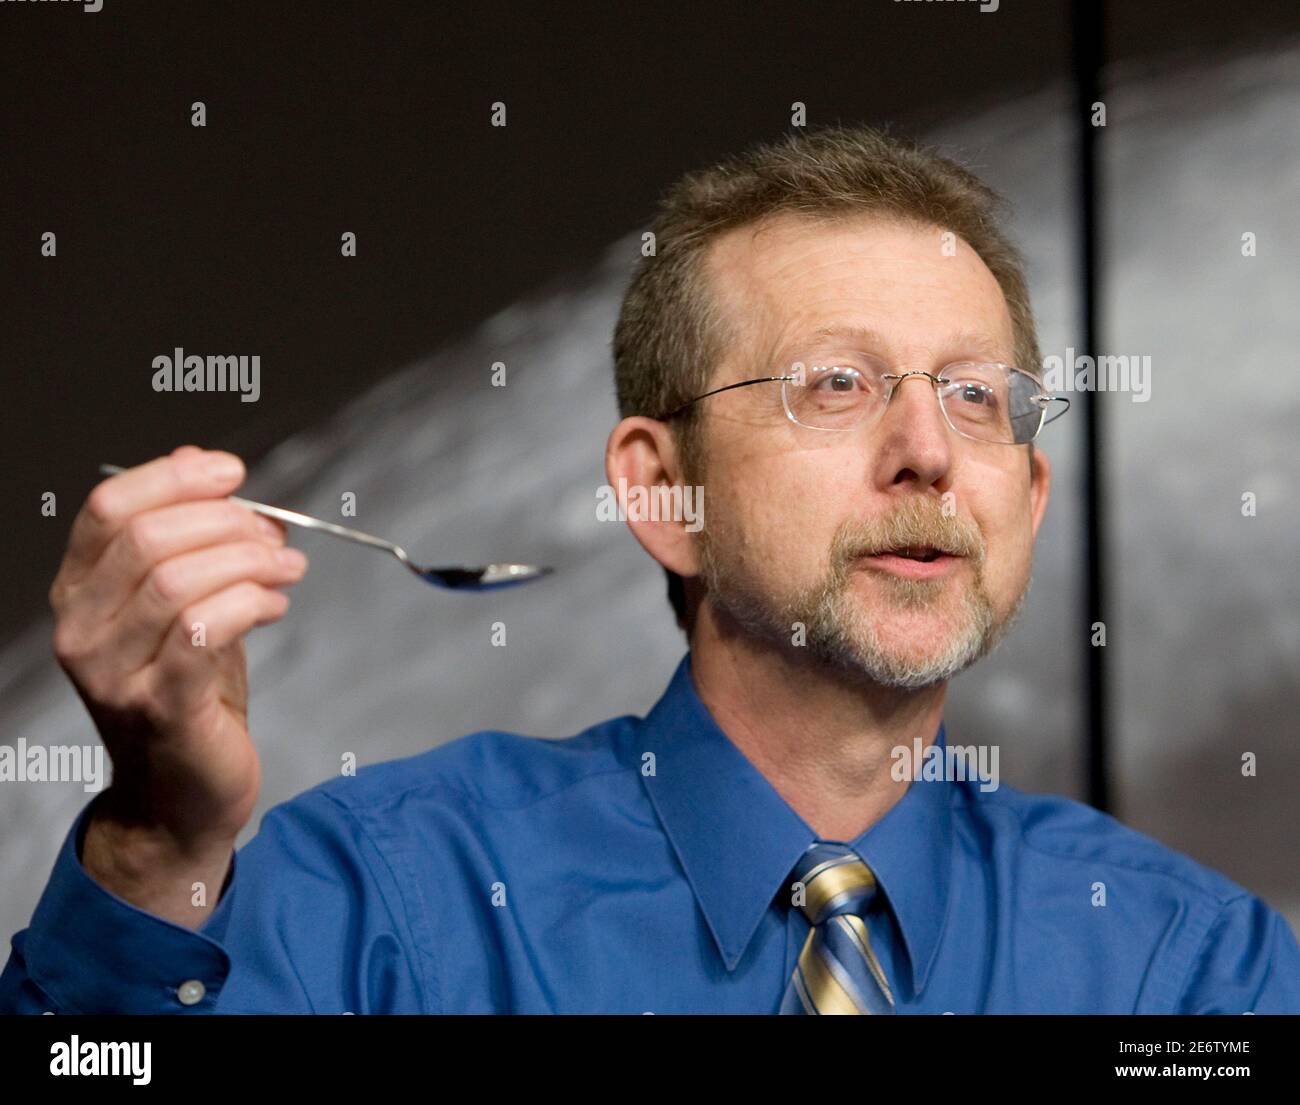 Director of Planetary Science Division in NASA's Science Mission Directorate Jim Green holds up a spoon to demonstrate how much water scientists thought to be on the moon during the NASA announcement of new science data about the presence of water on the moon collected during space missions in Washington September 24, 2009. Three separate missions examining the moon have found clear evidence of water there, apparently concentrated at the poles and possibly formed by the solar wind.  REUTERS/Larry Downing (UNITED STATES SCI TECH IMAGES OF THE DAY) Stock Photo